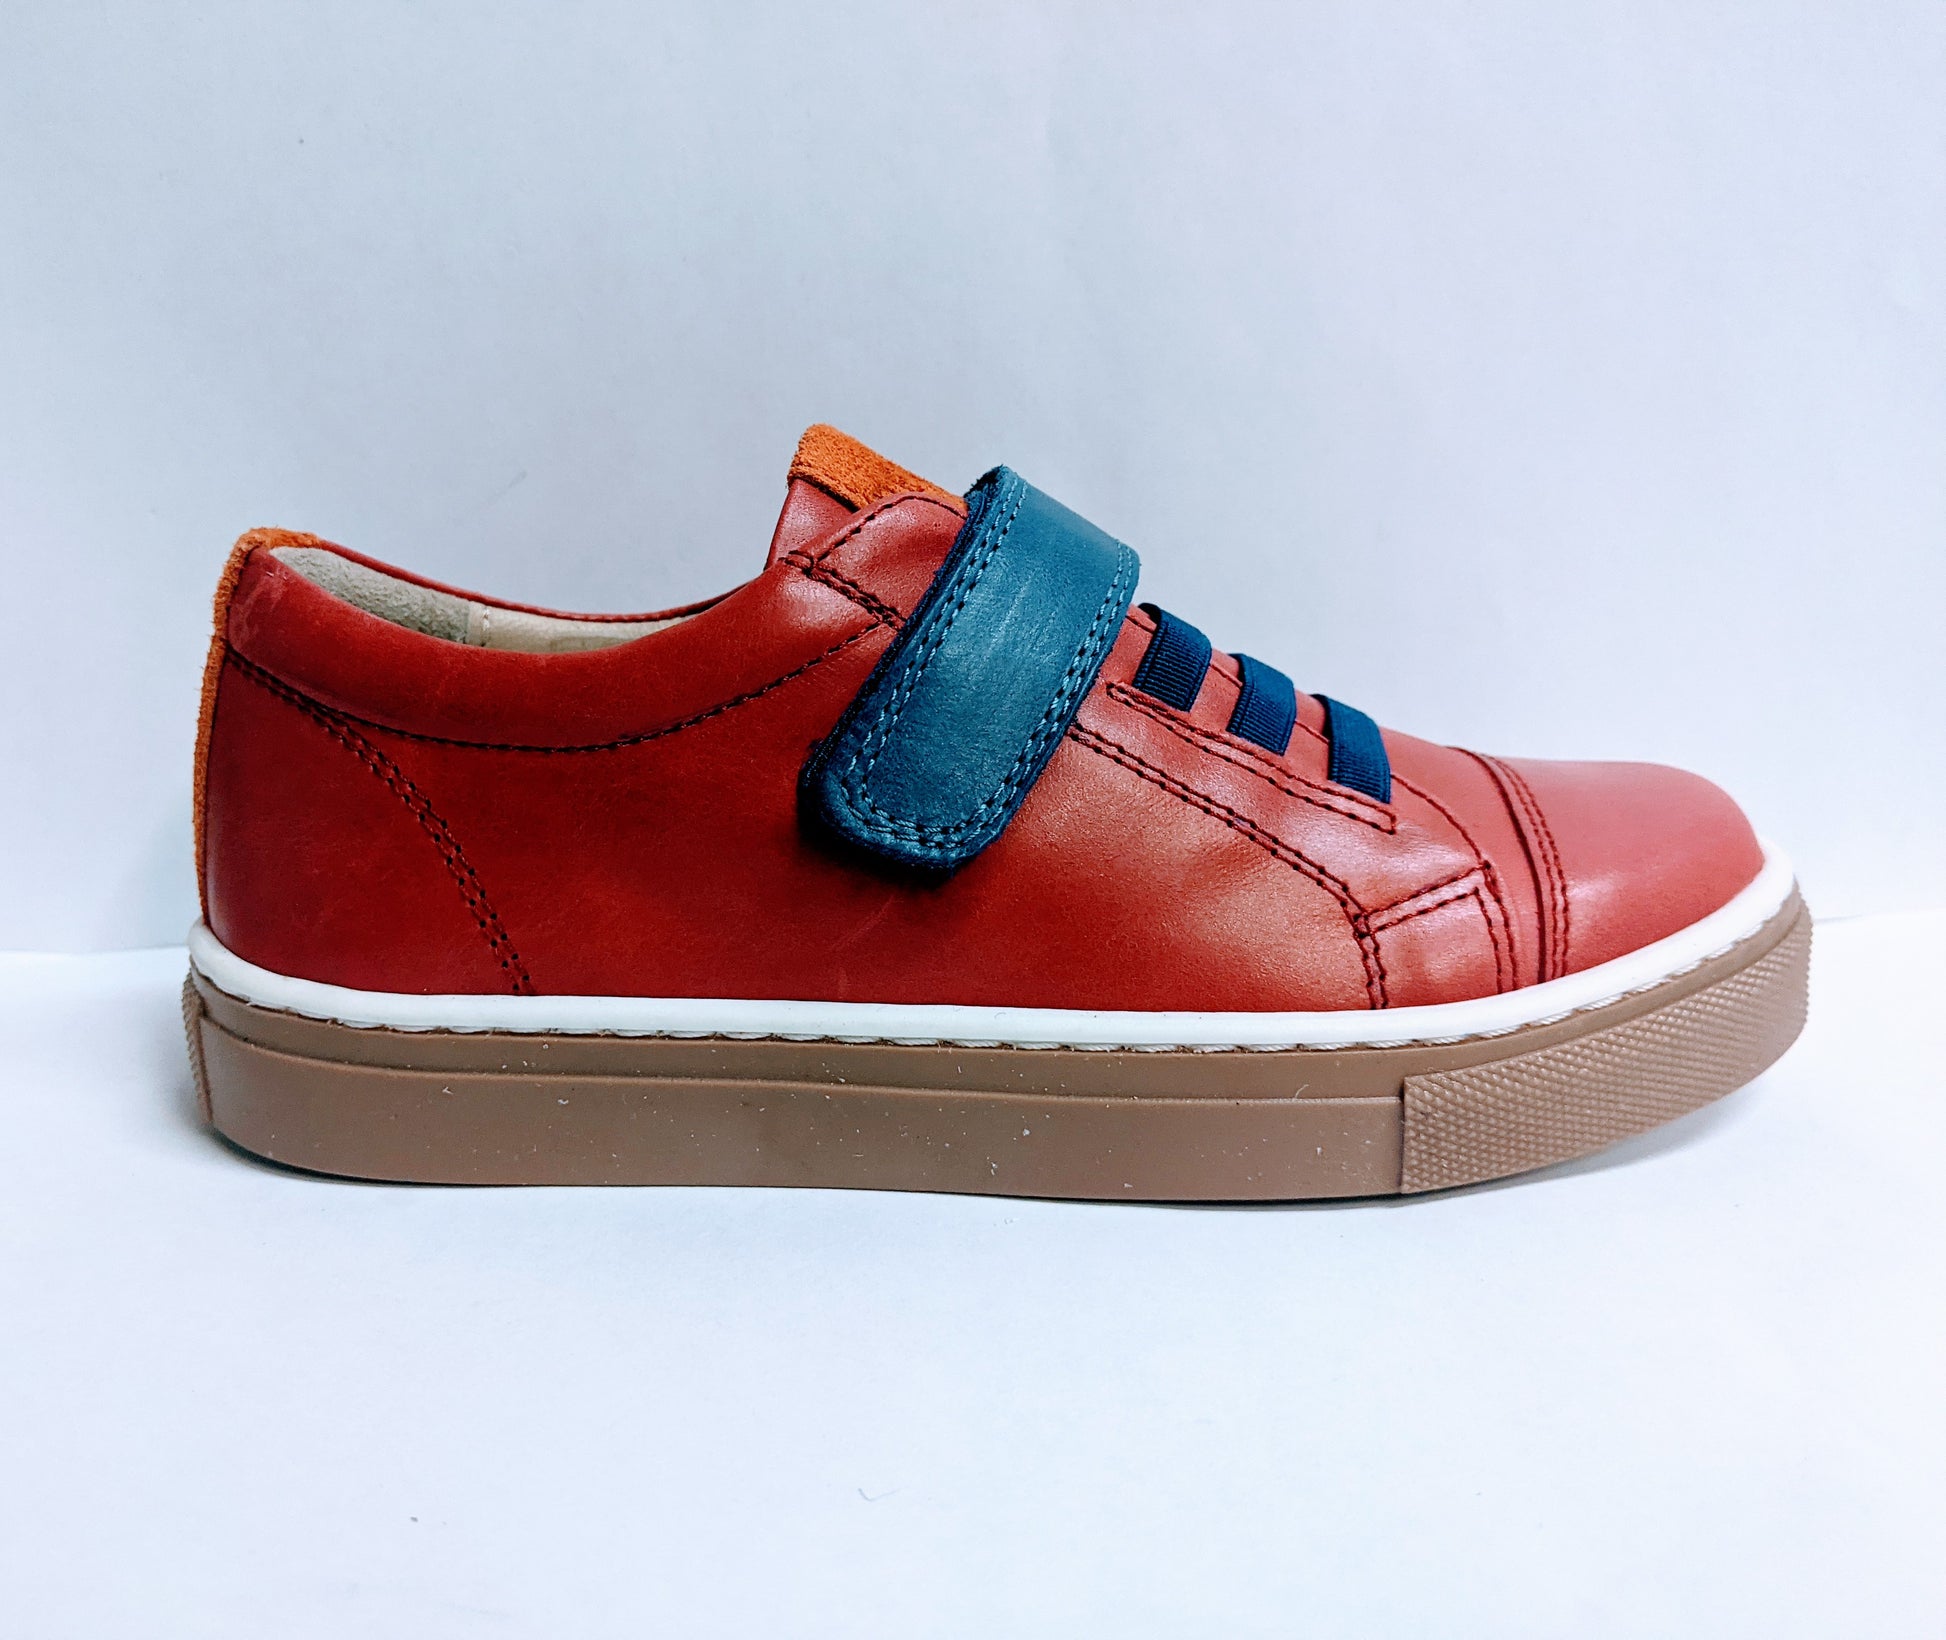 A boys smart trainer by Petasil, style Ryan 2, in red and blue with velcro fastening. Right side view.